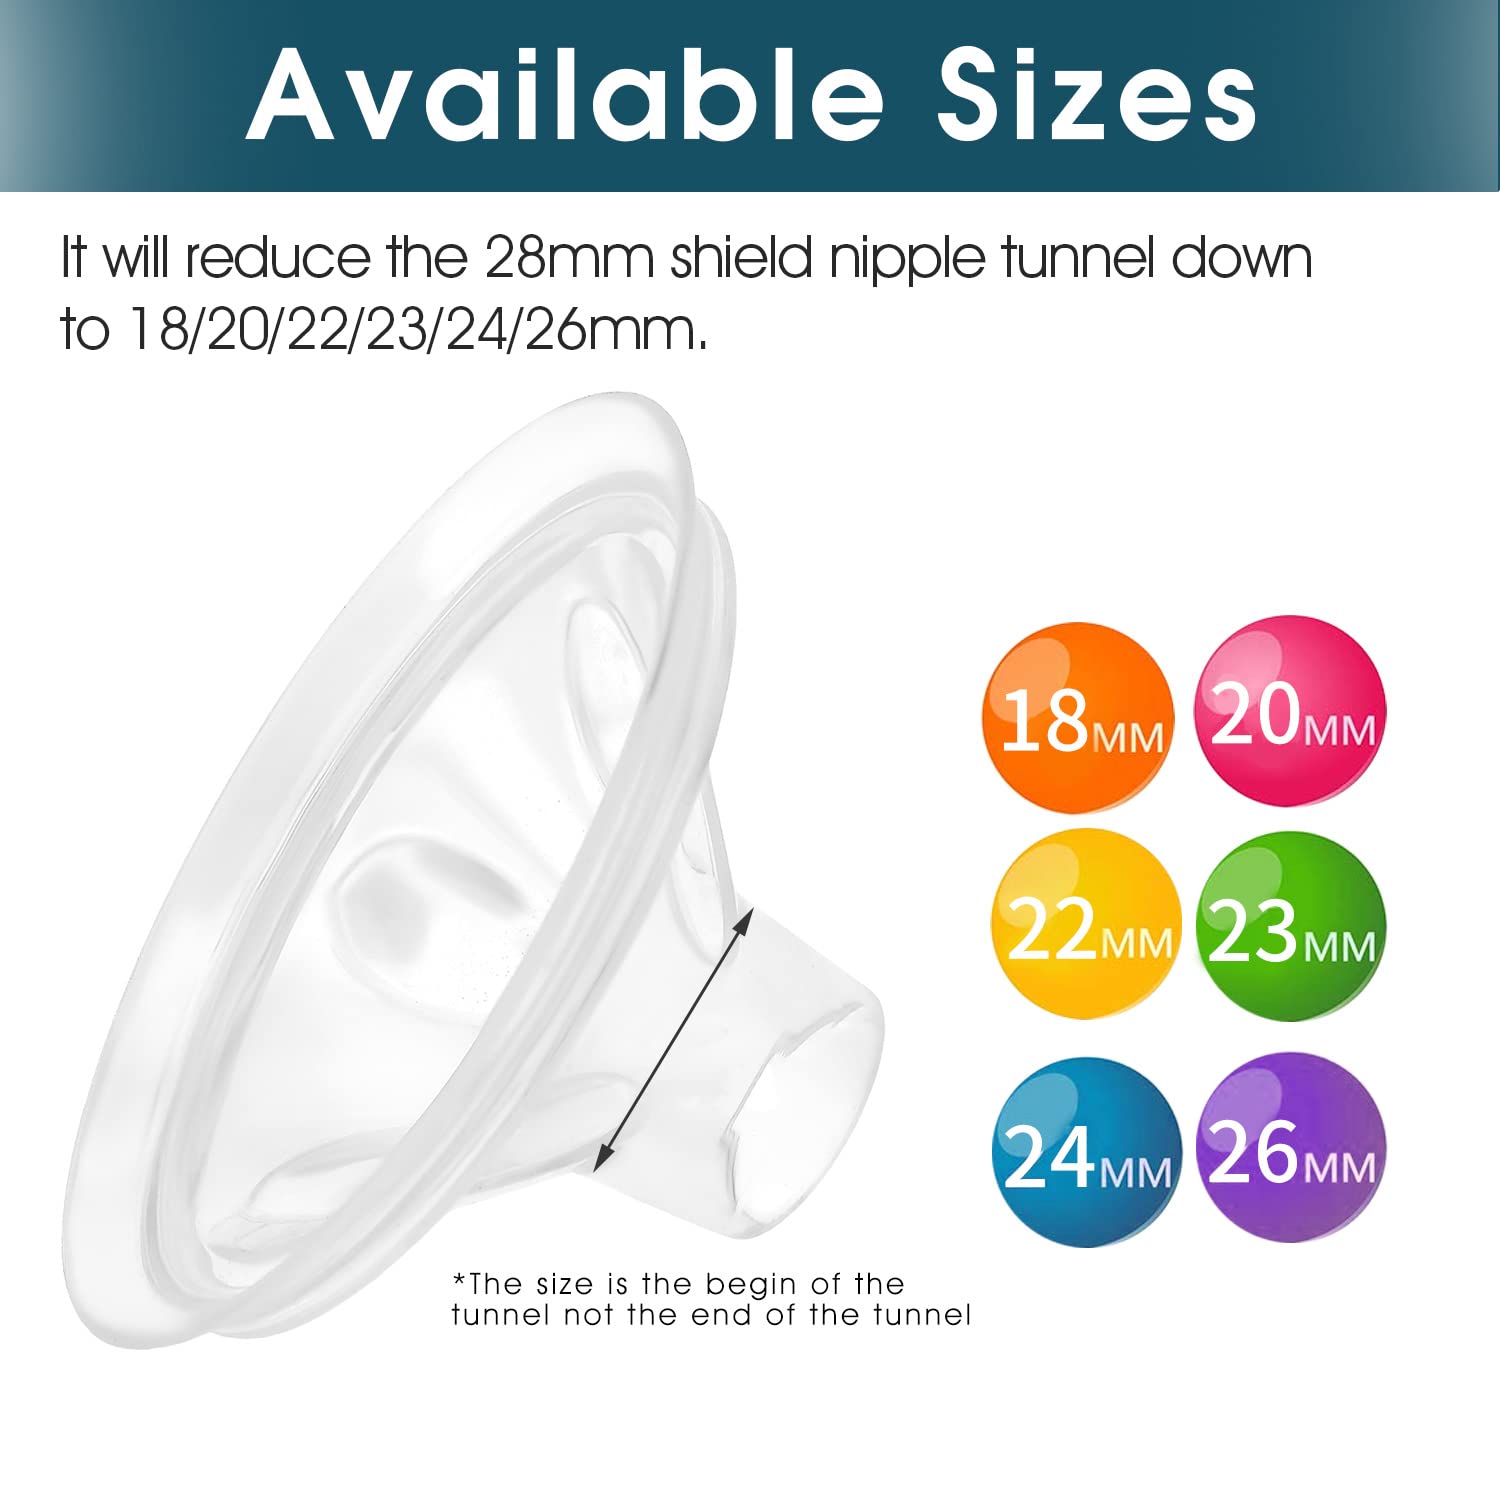 begical 1pc Stride Flange Cushion Insert 26mm Compatible with Spectra 28mm Breast Pump Shield to Reduce Nipple Tunnel Down to 26mm; Petal Cushion Pad Replace Flange Insert Improved Comfort and Fit